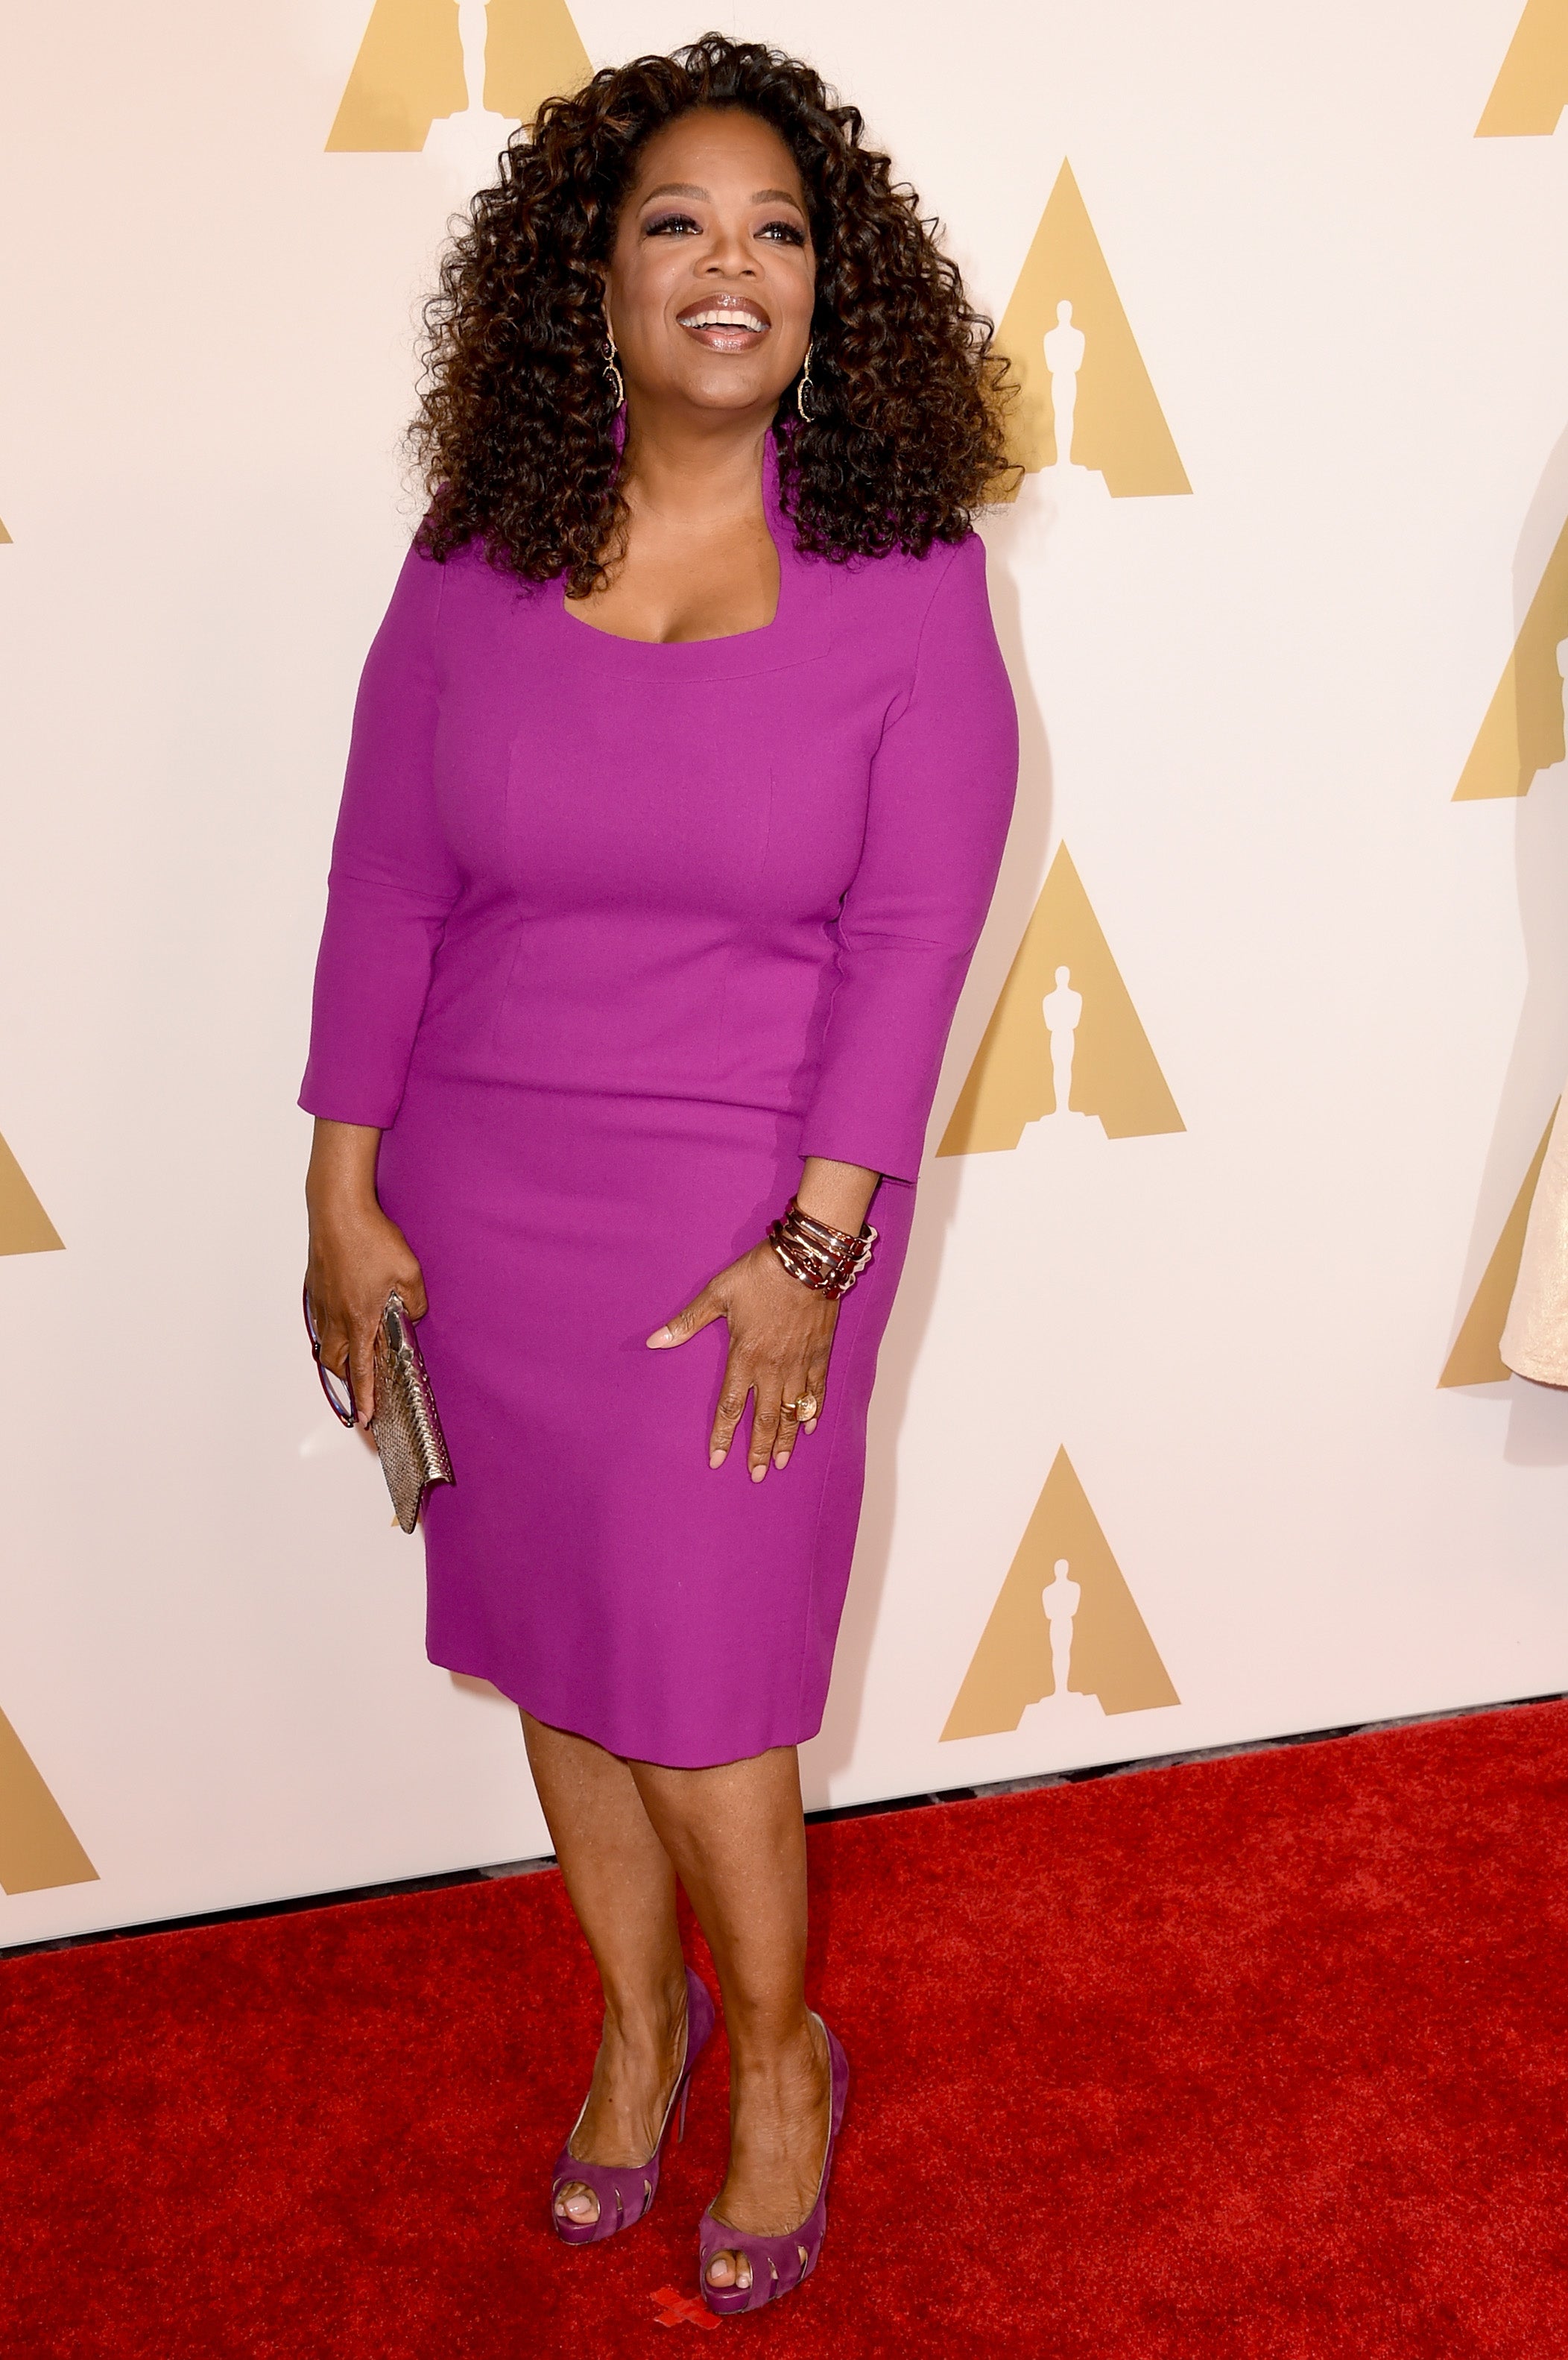 20 Times Oprah Gave Us All The Red Carpet Glamour We Could Handle